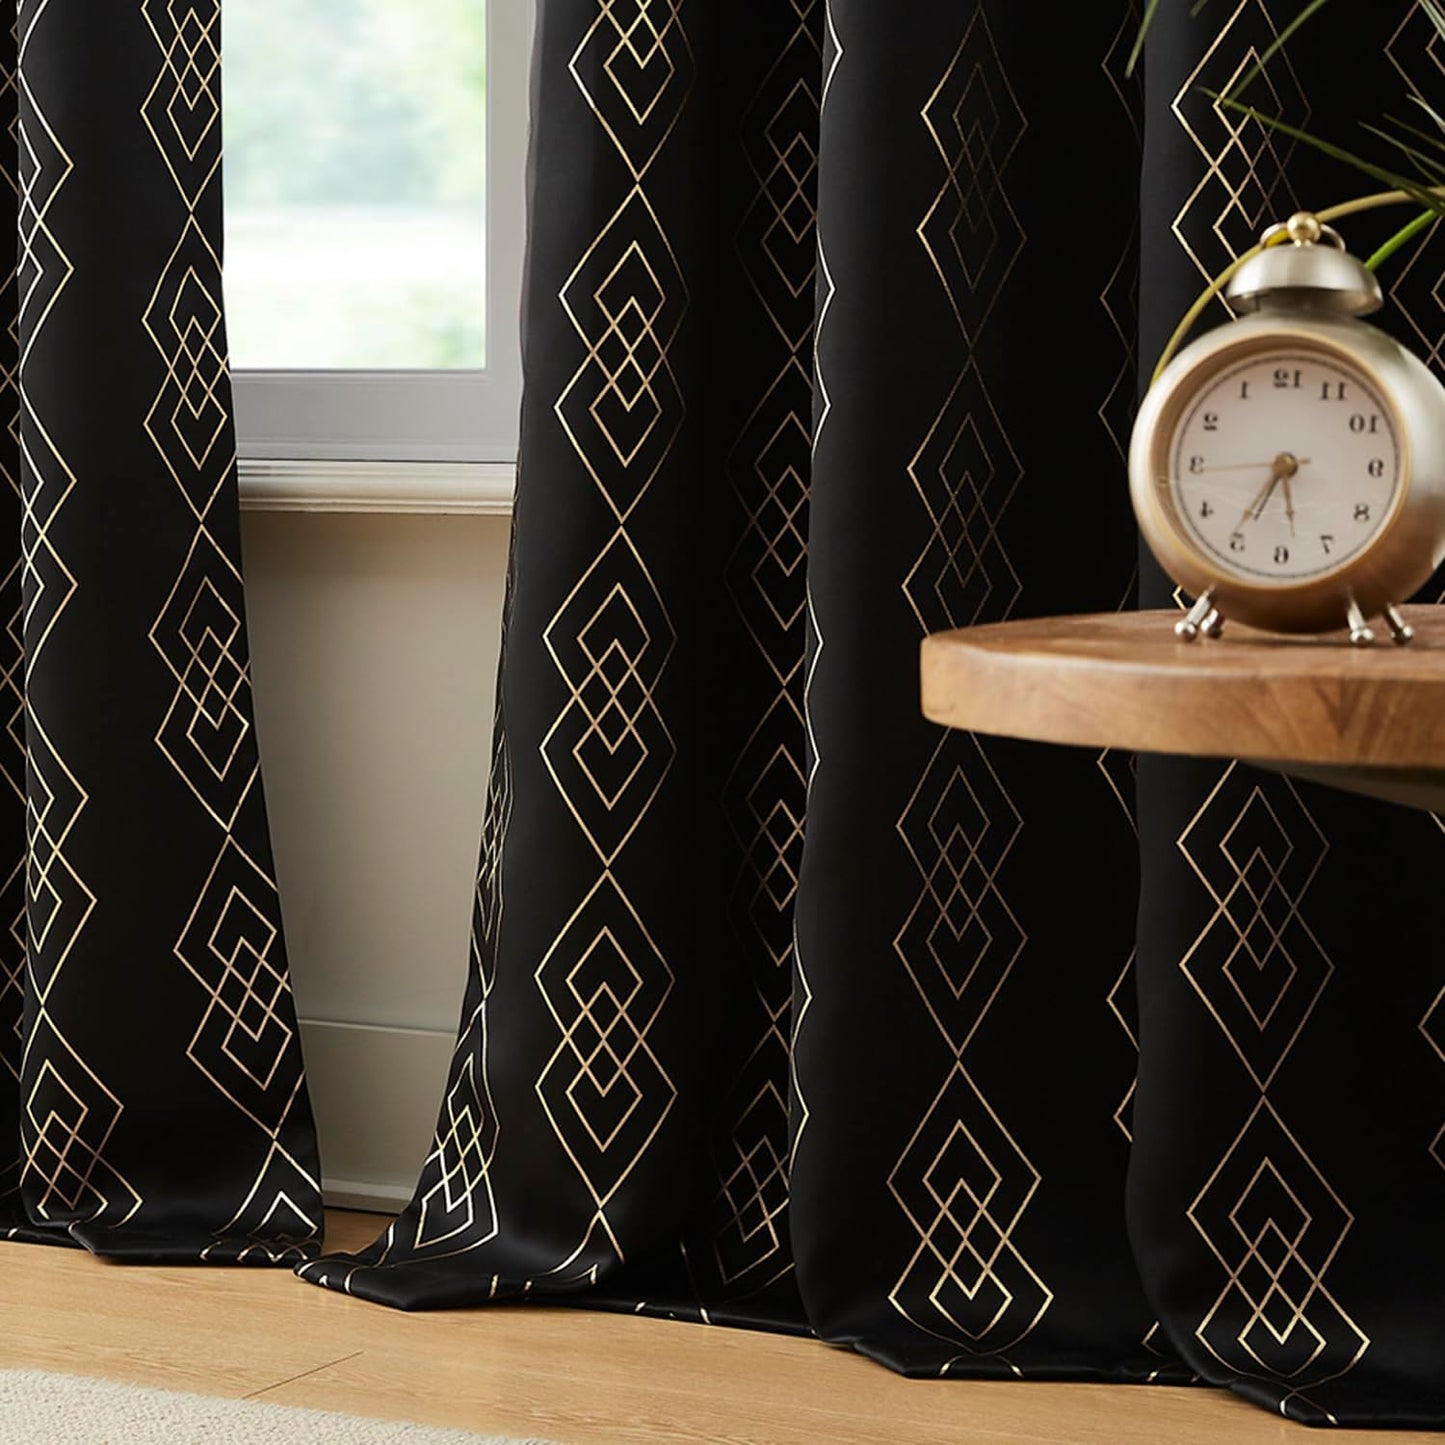 Metallic Geo Blackout Curtain Panels for Bedroom Thermal Insulated Light Blocking Foil Trellis Moroccan Window Treatments Diamond Grommet Drapes for Living-Room, Set of 2, 50" X 84", Beige/Gold  ugoutry Geometric Black 50"X96"X2 